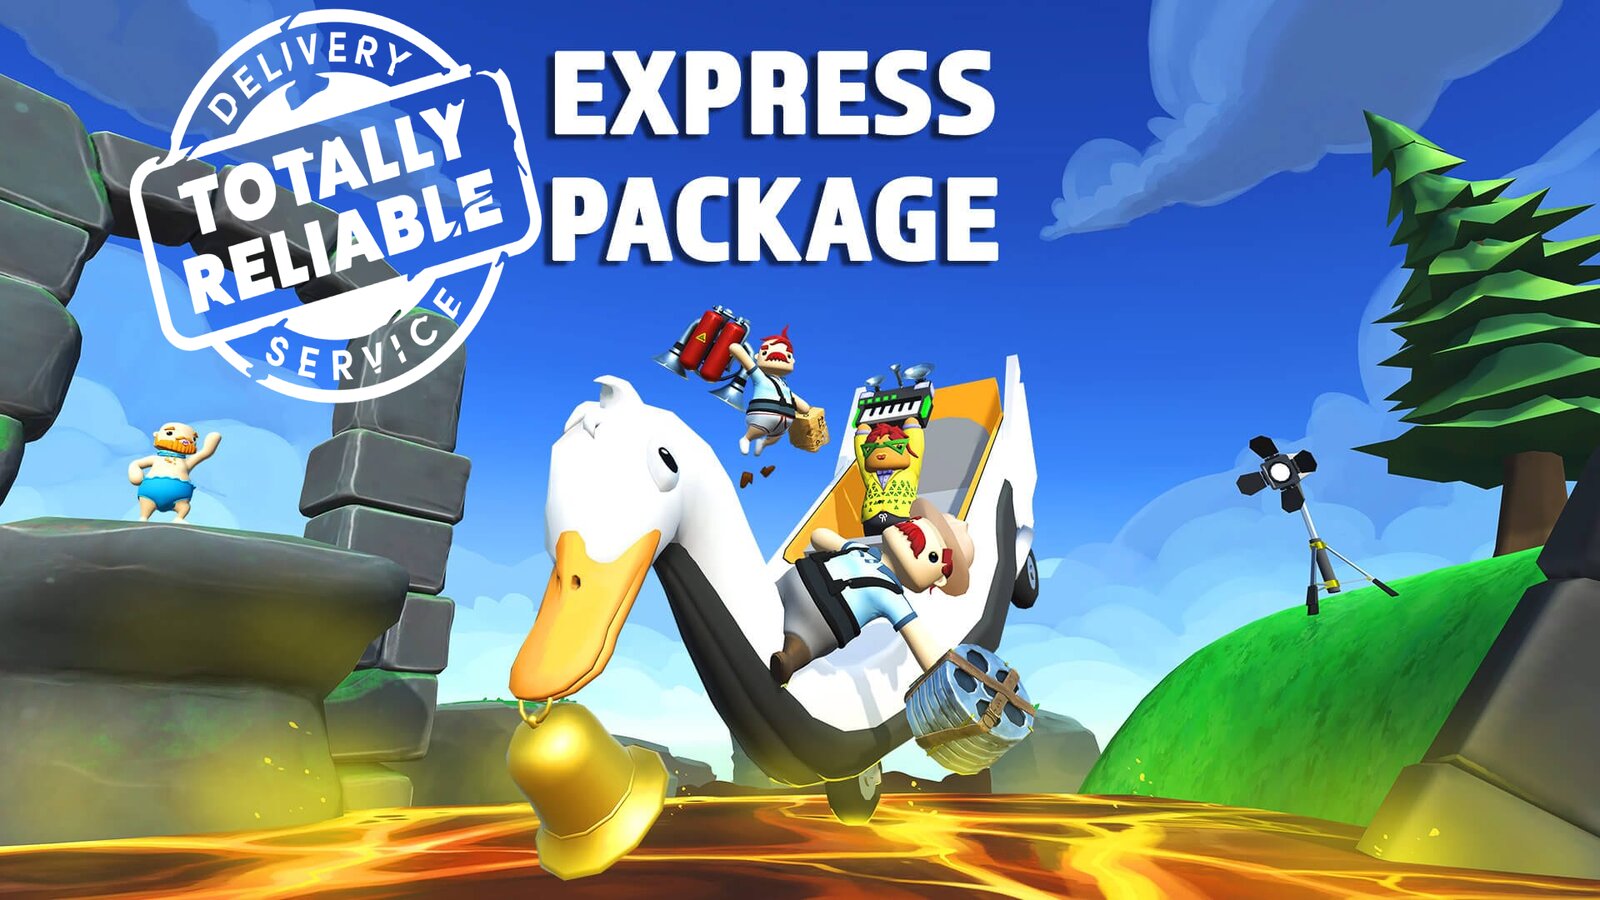 Totally Reliable Delivery Service - Express Package